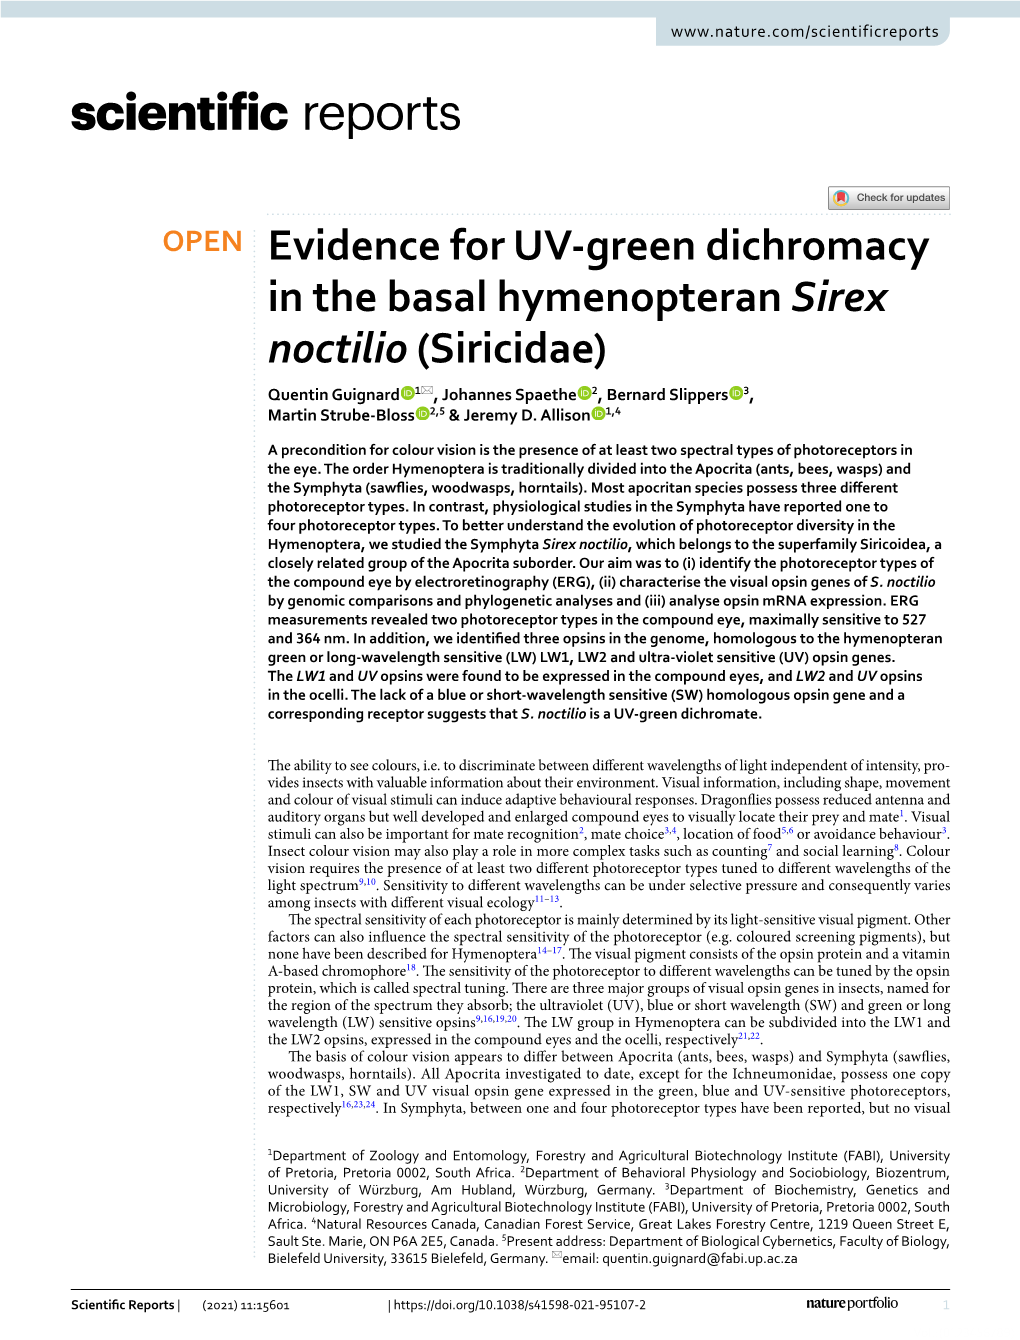 Evidence for UV-Green Dichromacy in the Basal Hymenopteran Sirex Noctilio